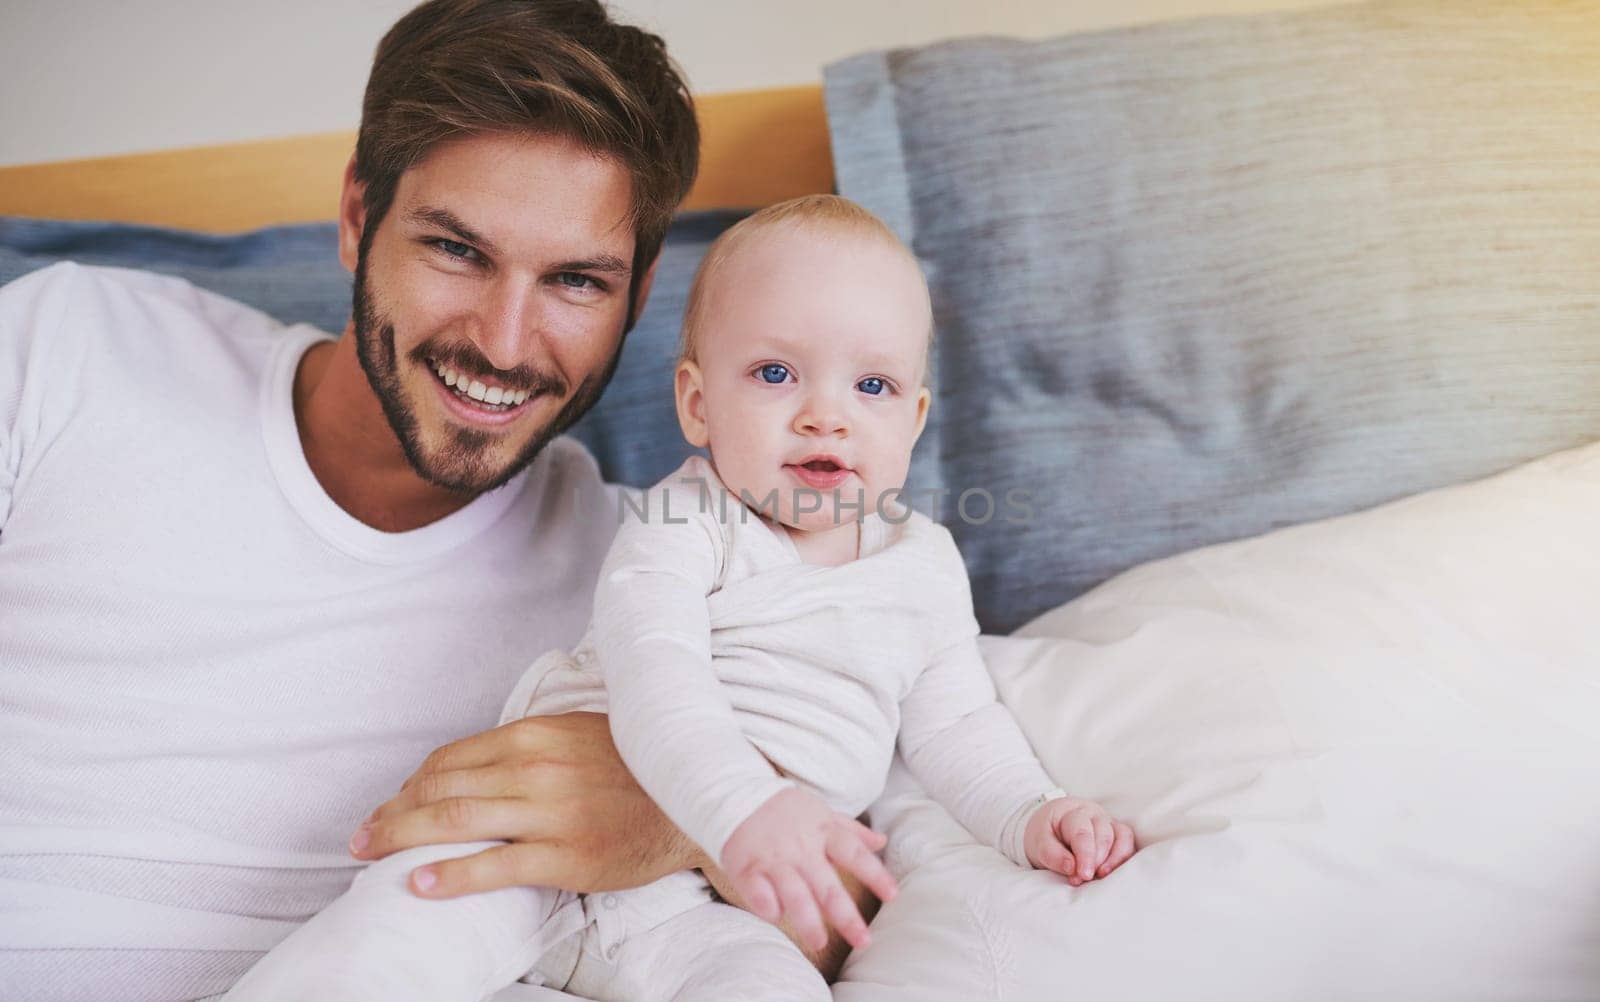 Bedroom, happy and portrait of father with baby for bonding, relationship and love for parenting. Family, home and dad with newborn infant on bed for child development, support and childcare in house.